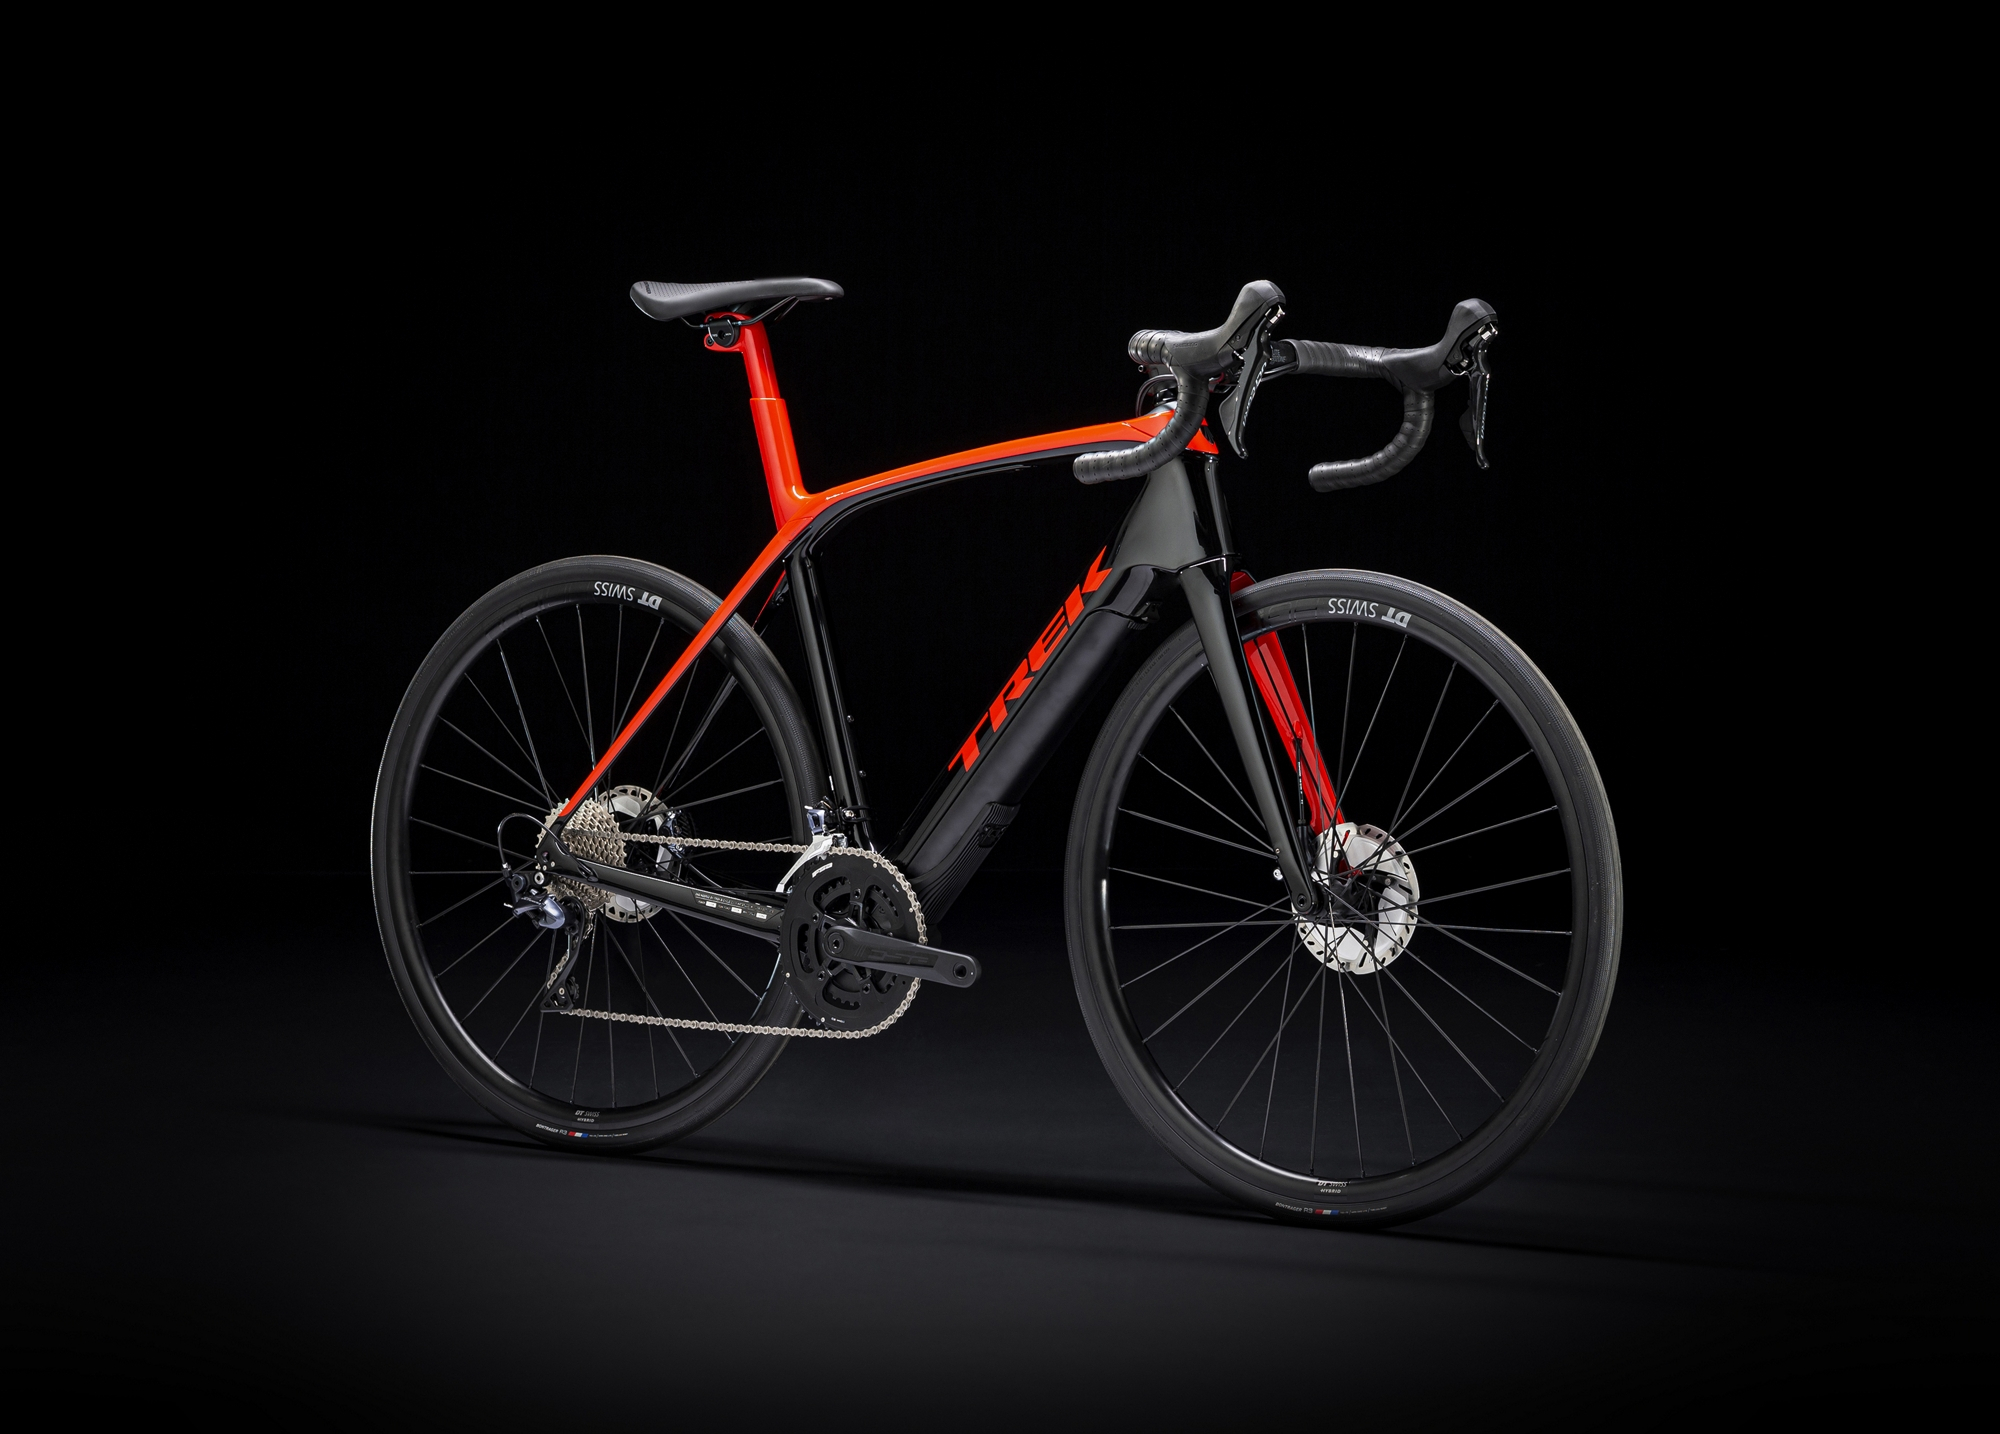 Domane+ LT, Save £1,050 On A Full Carbon Electric Road Bike